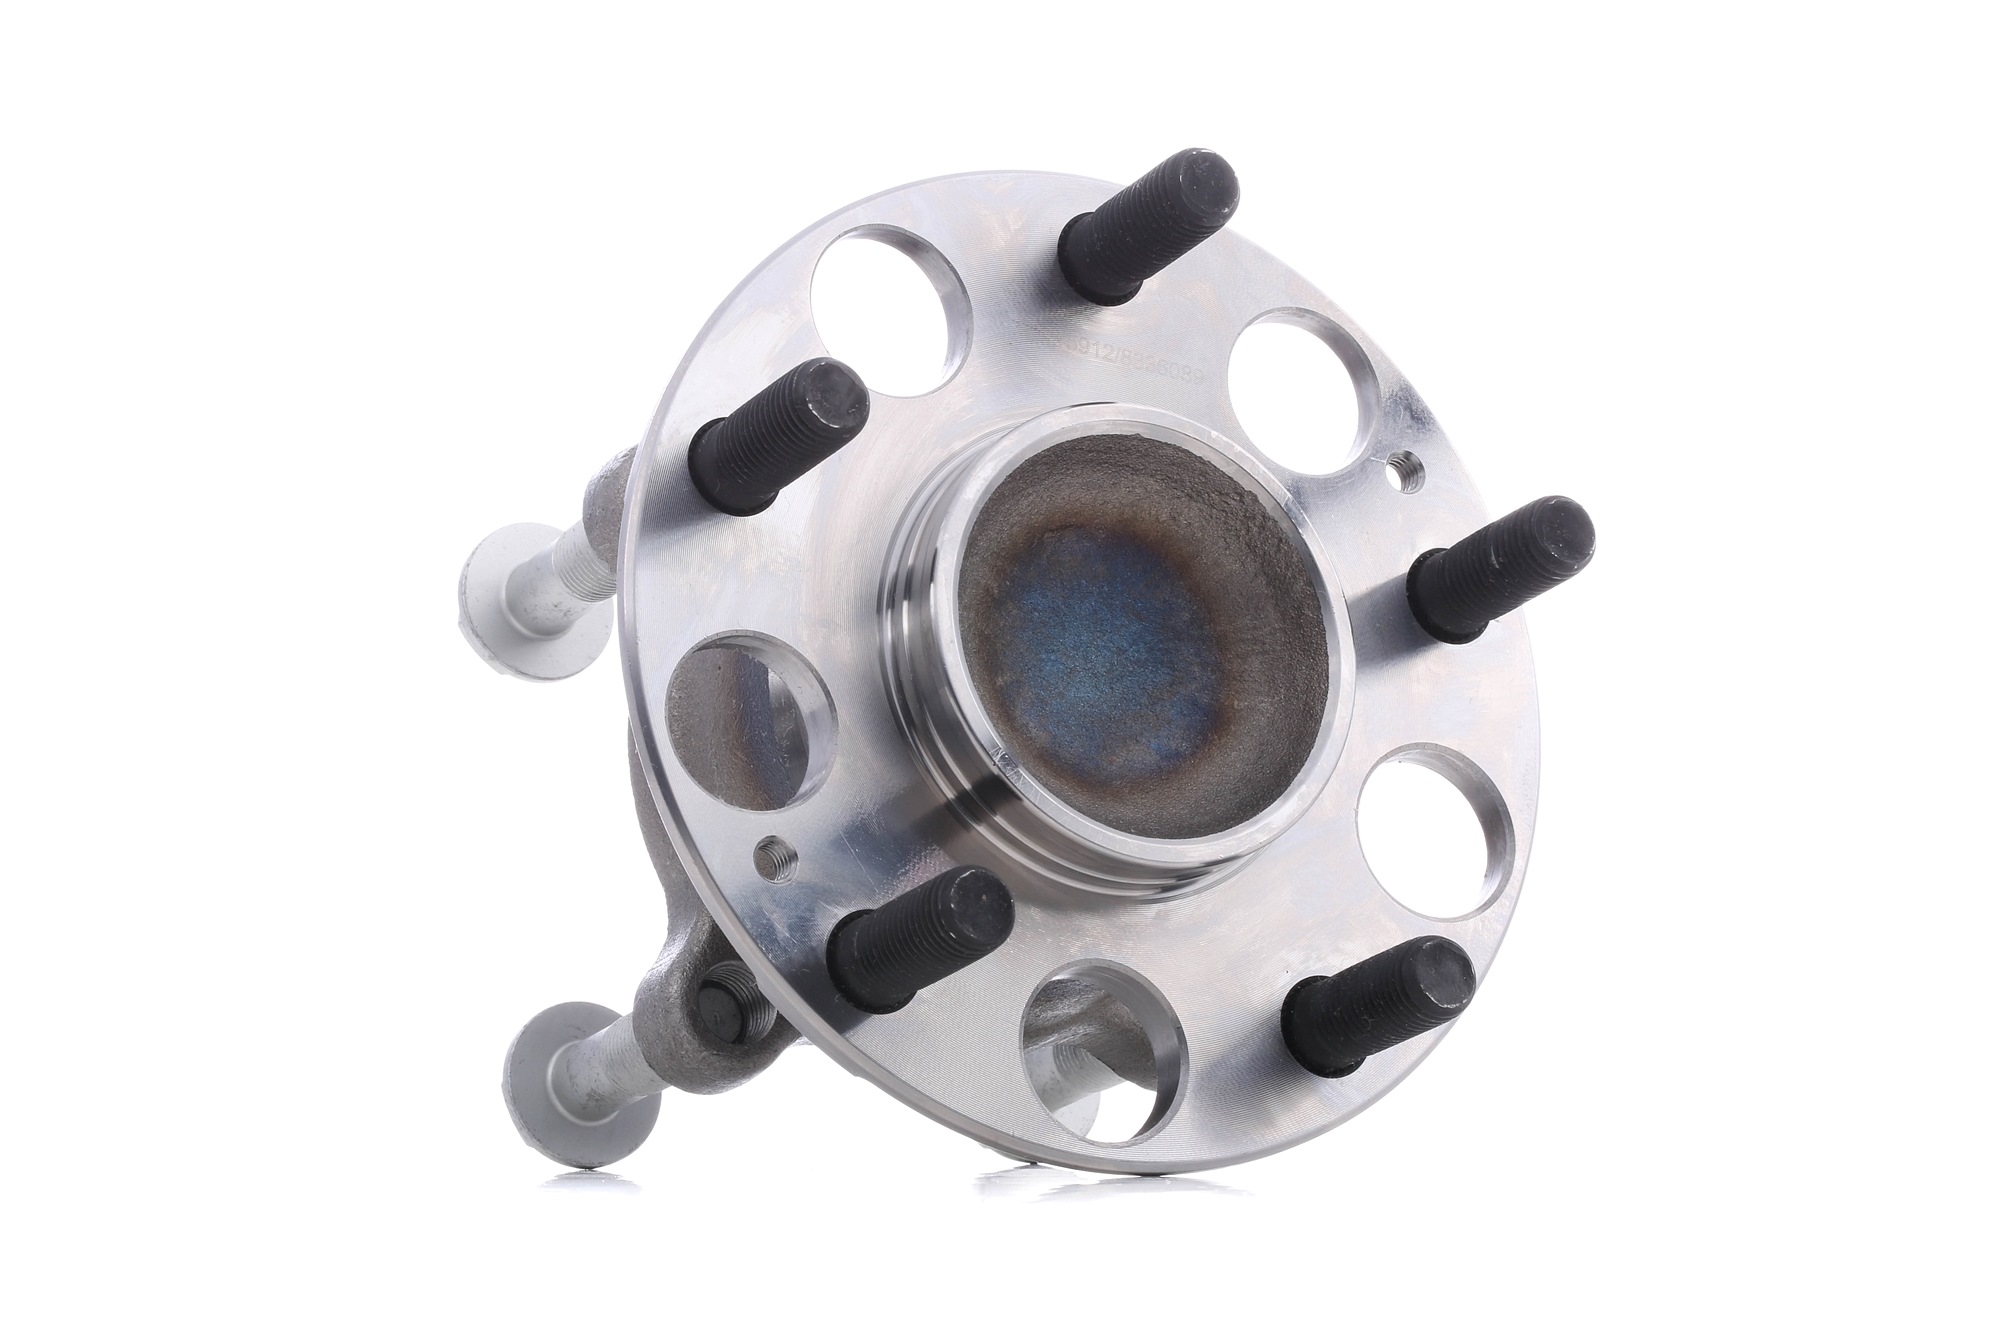 SKWB-0180878 STARK Wheel hub assembly HONDA Rear Axle, Left, Right, with integrated magnetic sensor ring, 140, 71,75 mm